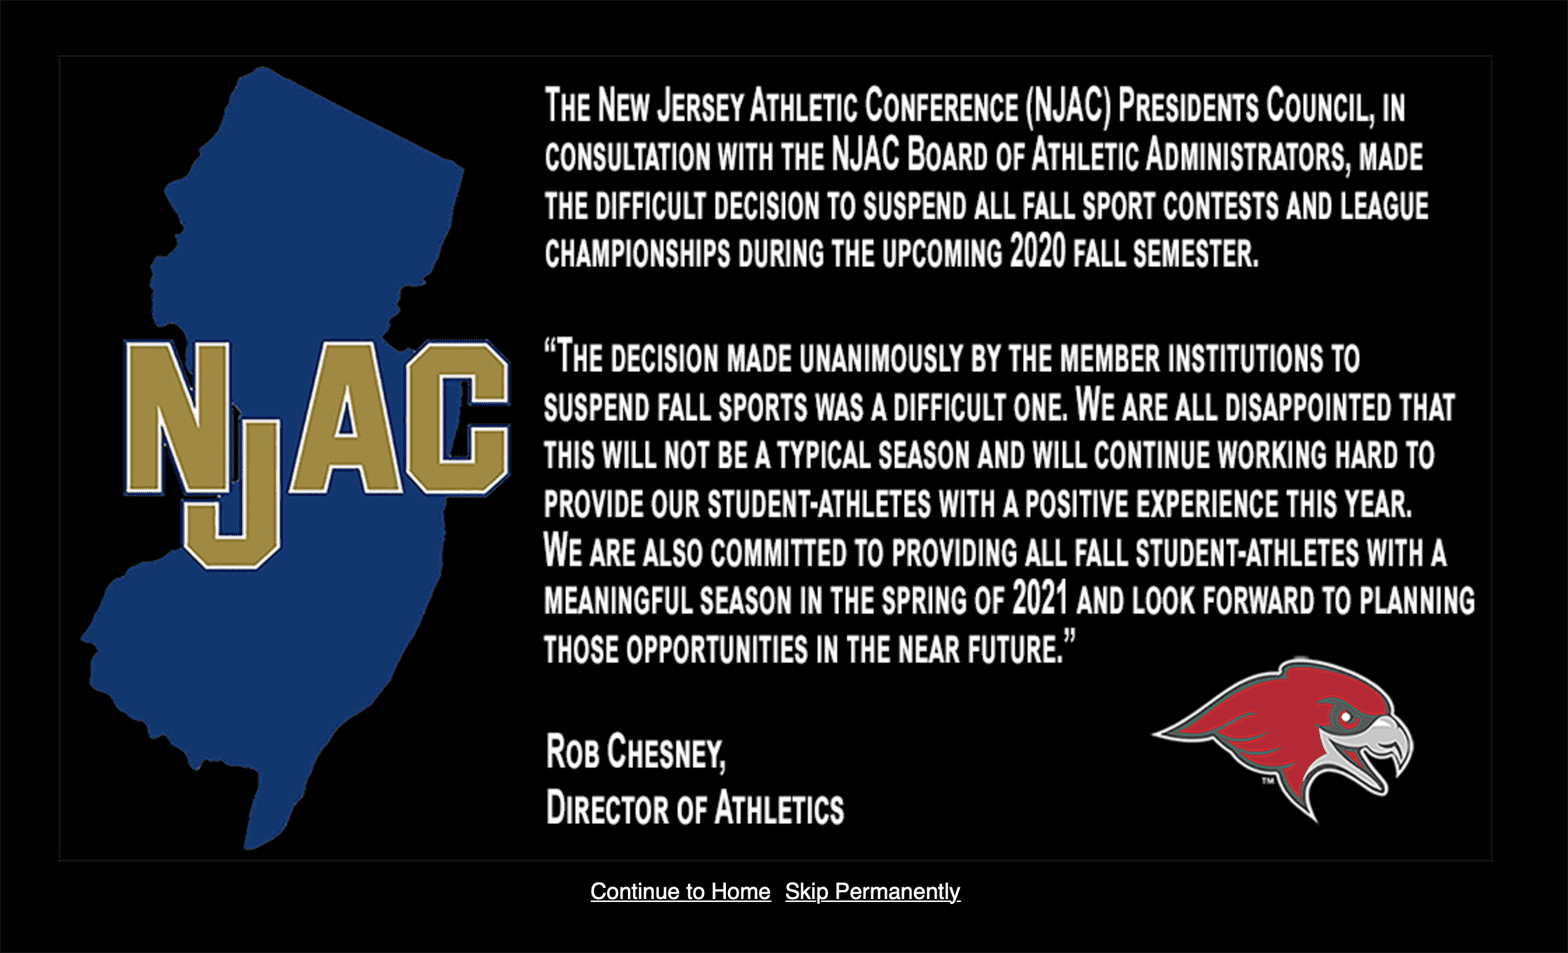 Director of Athletics Rob Chesney made a statement regarding the NJAC's decision to suspend all fall sports. Photo courtesy of montclairathletics.com